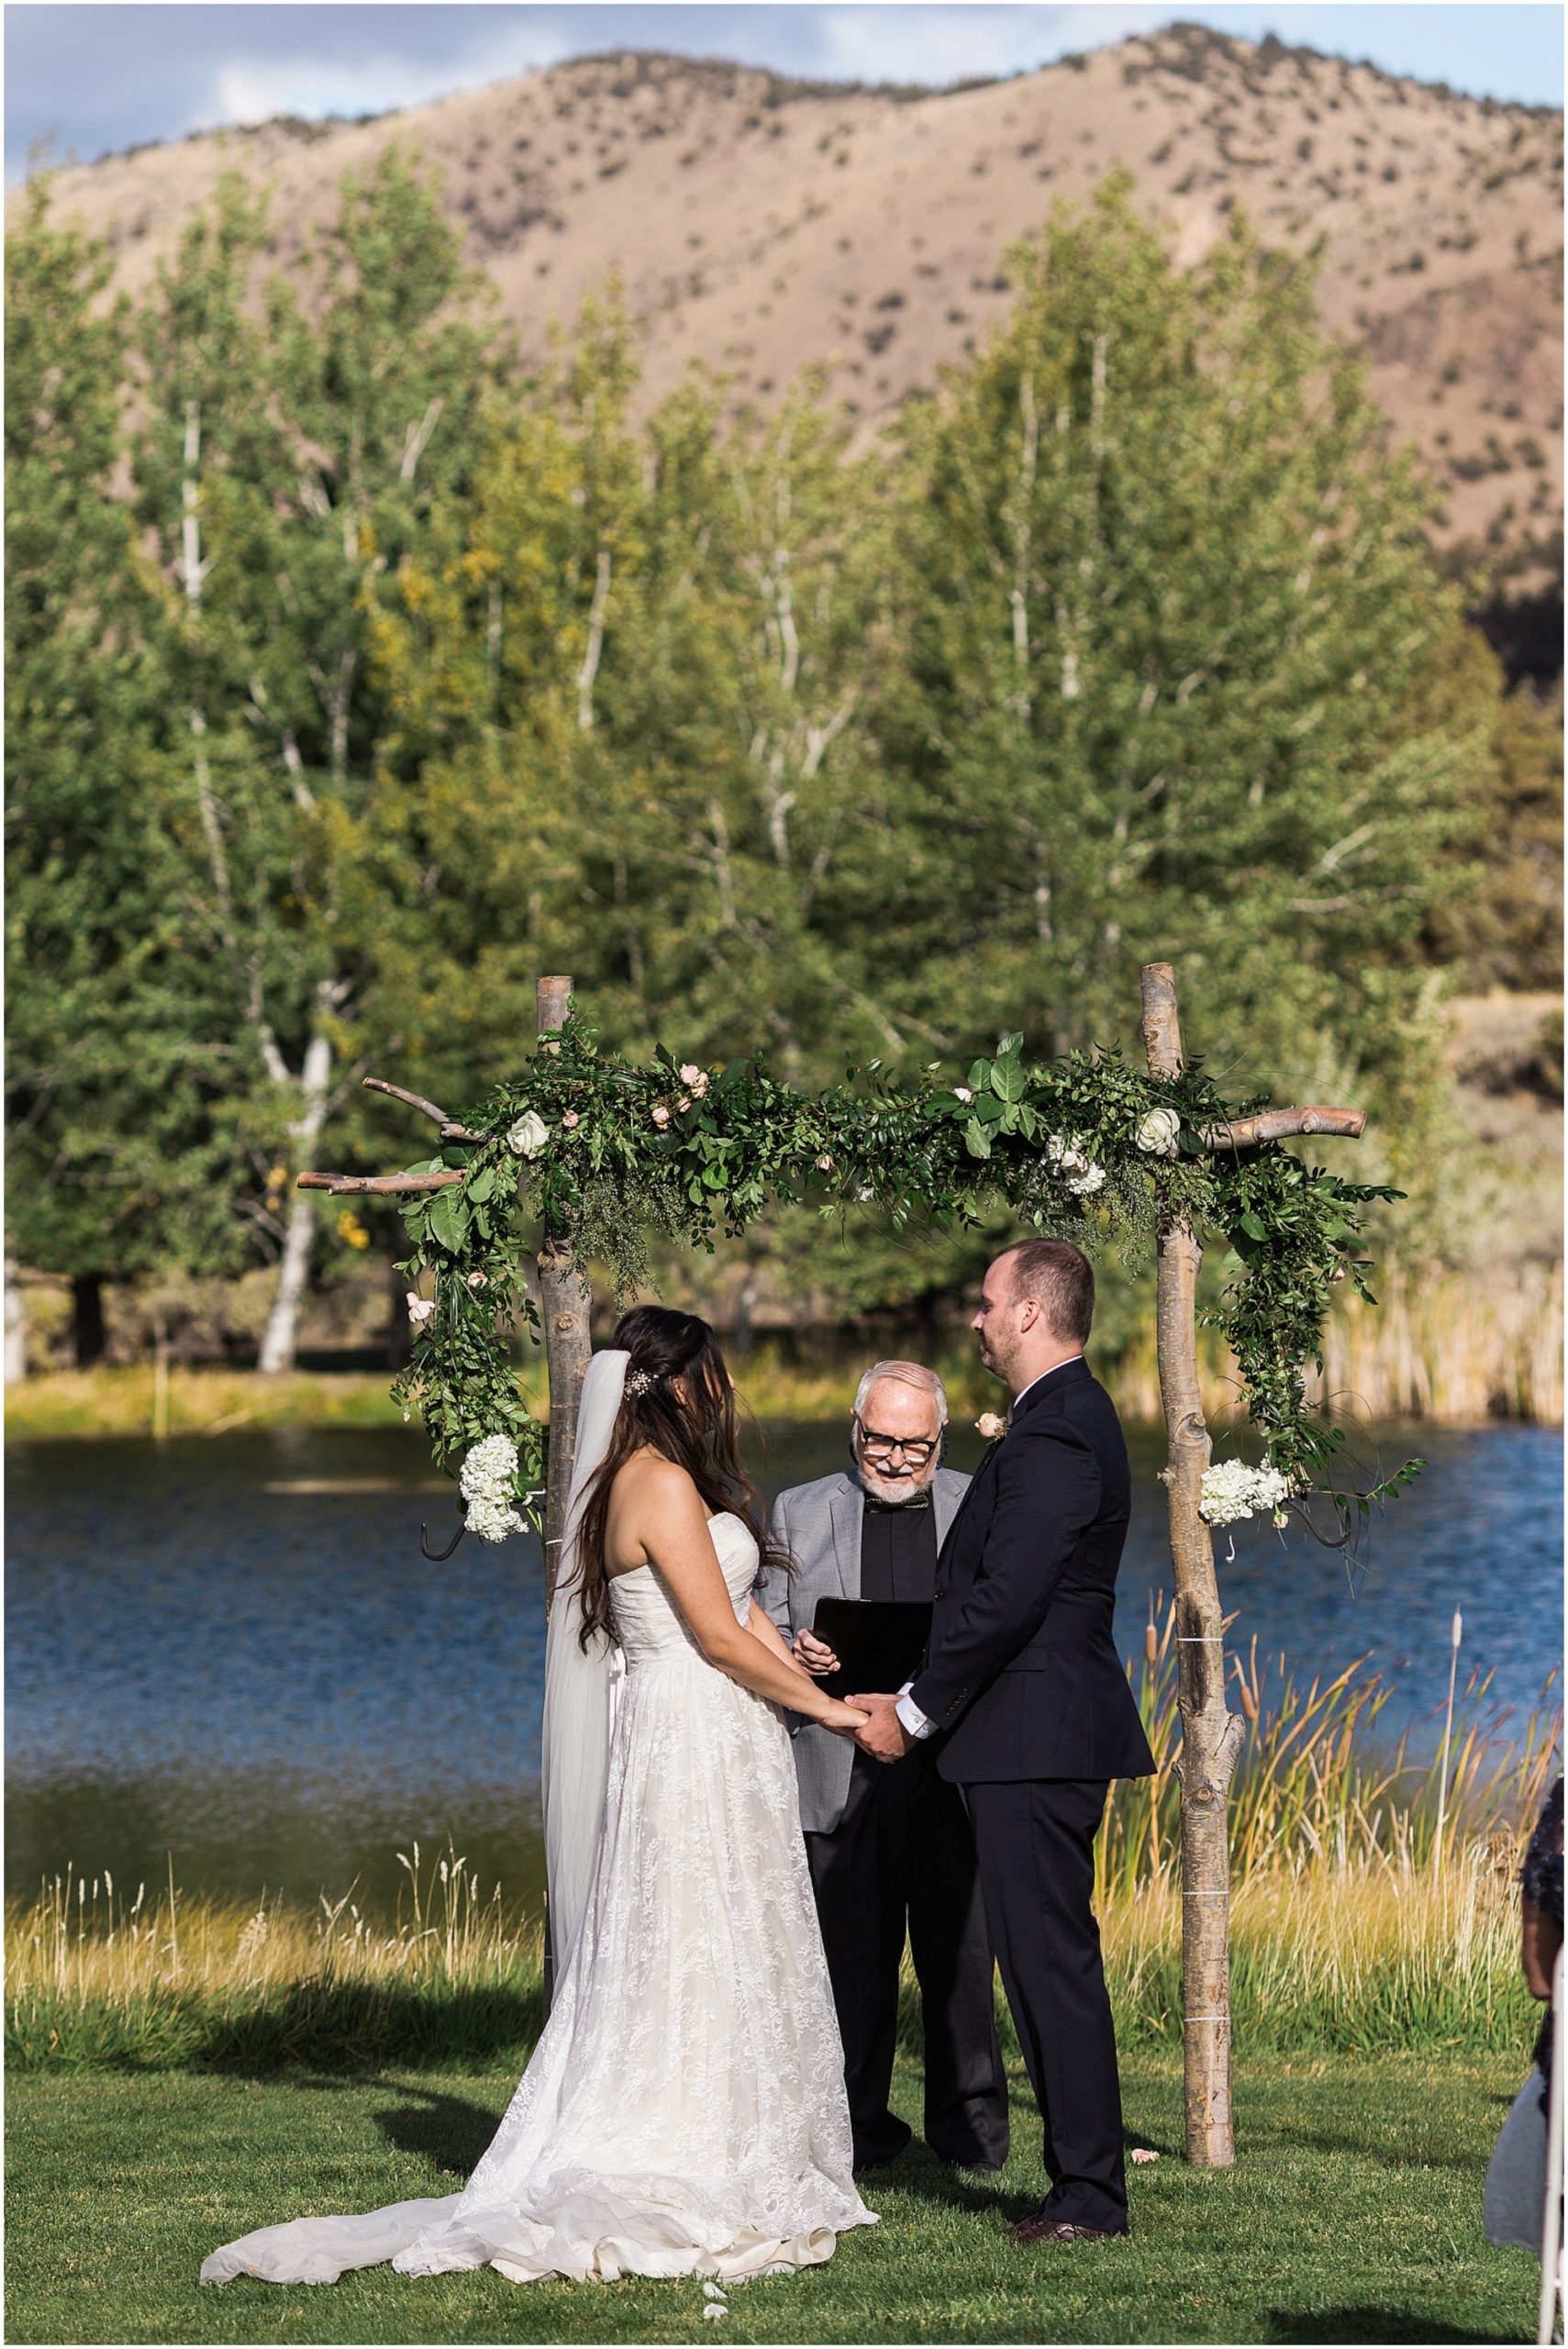 The bride and groom stand in front of their flower adorned arbor situated on the lawn in front of a beautiful pond at the Tuscan Stables wedding venue at Ranch at the Canyons in Oregon. | Erica Swantek Photography